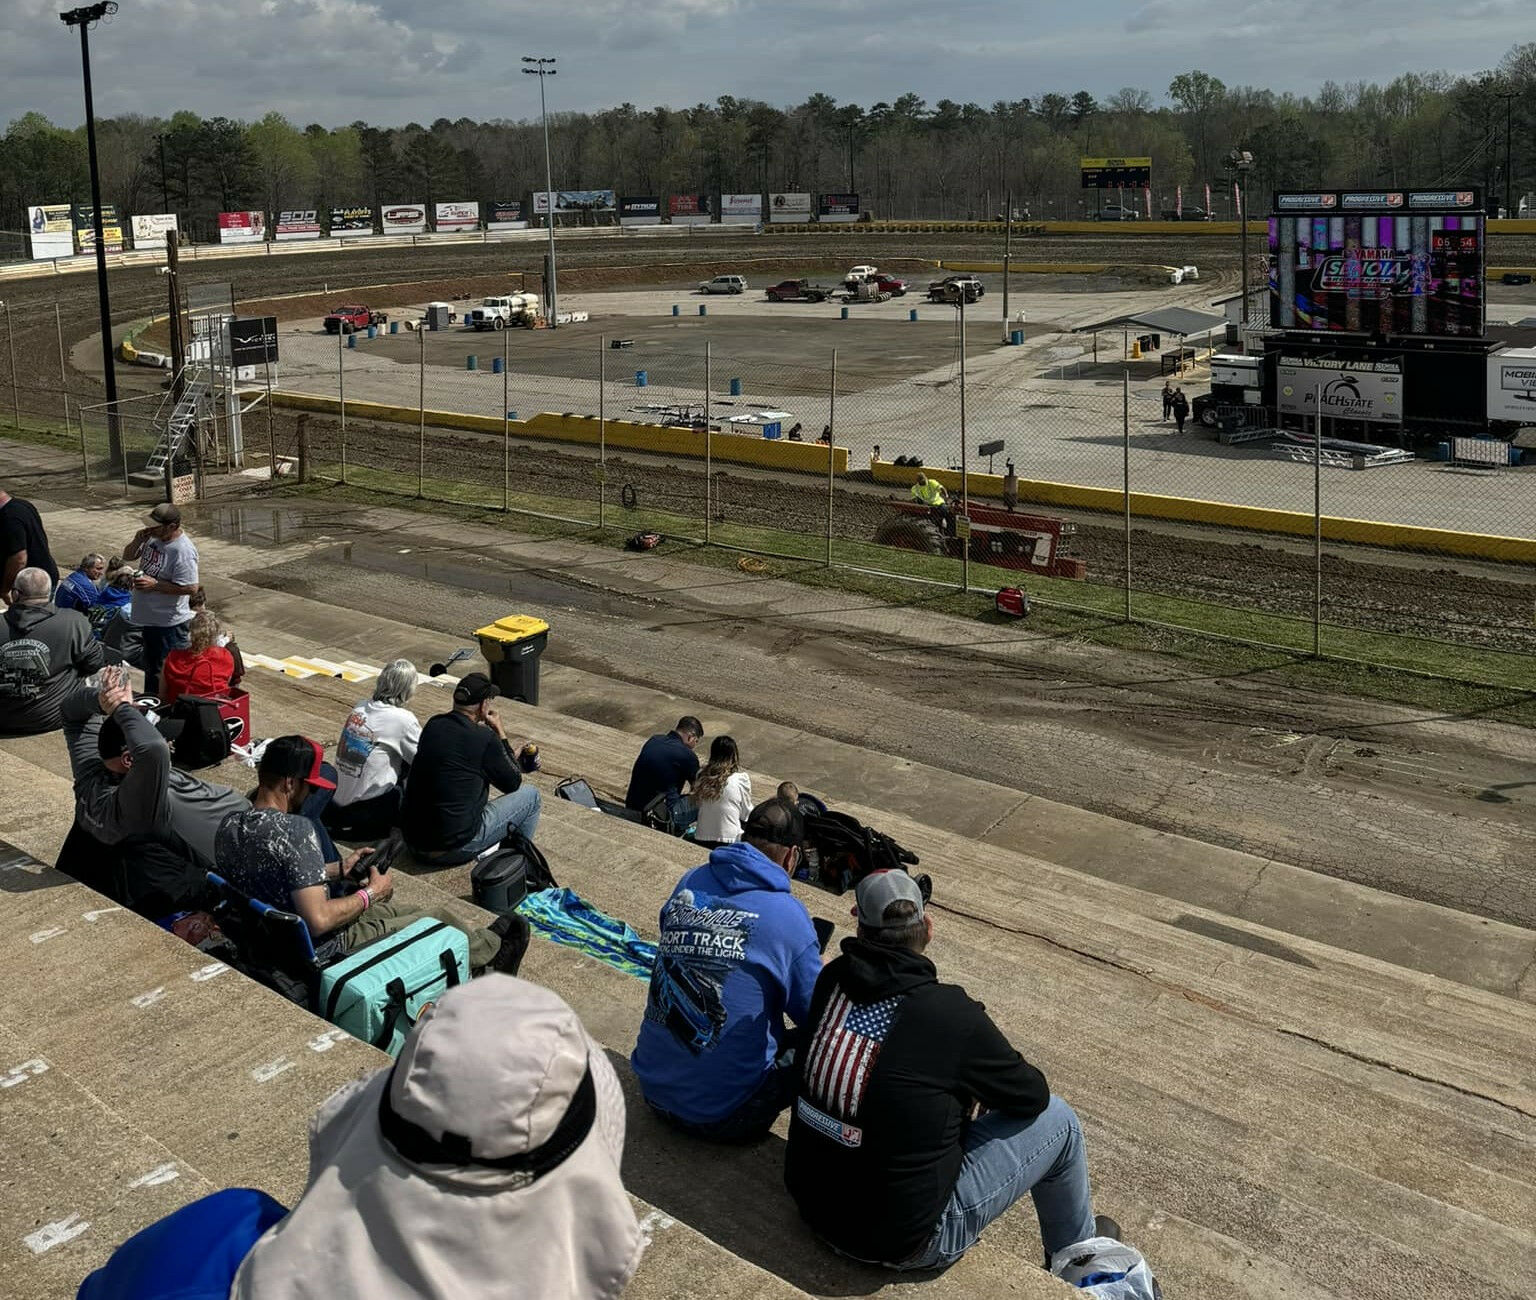 Crews were not able to get the track in usable condition Saturday in Georgia. Photo courtesy AFT.